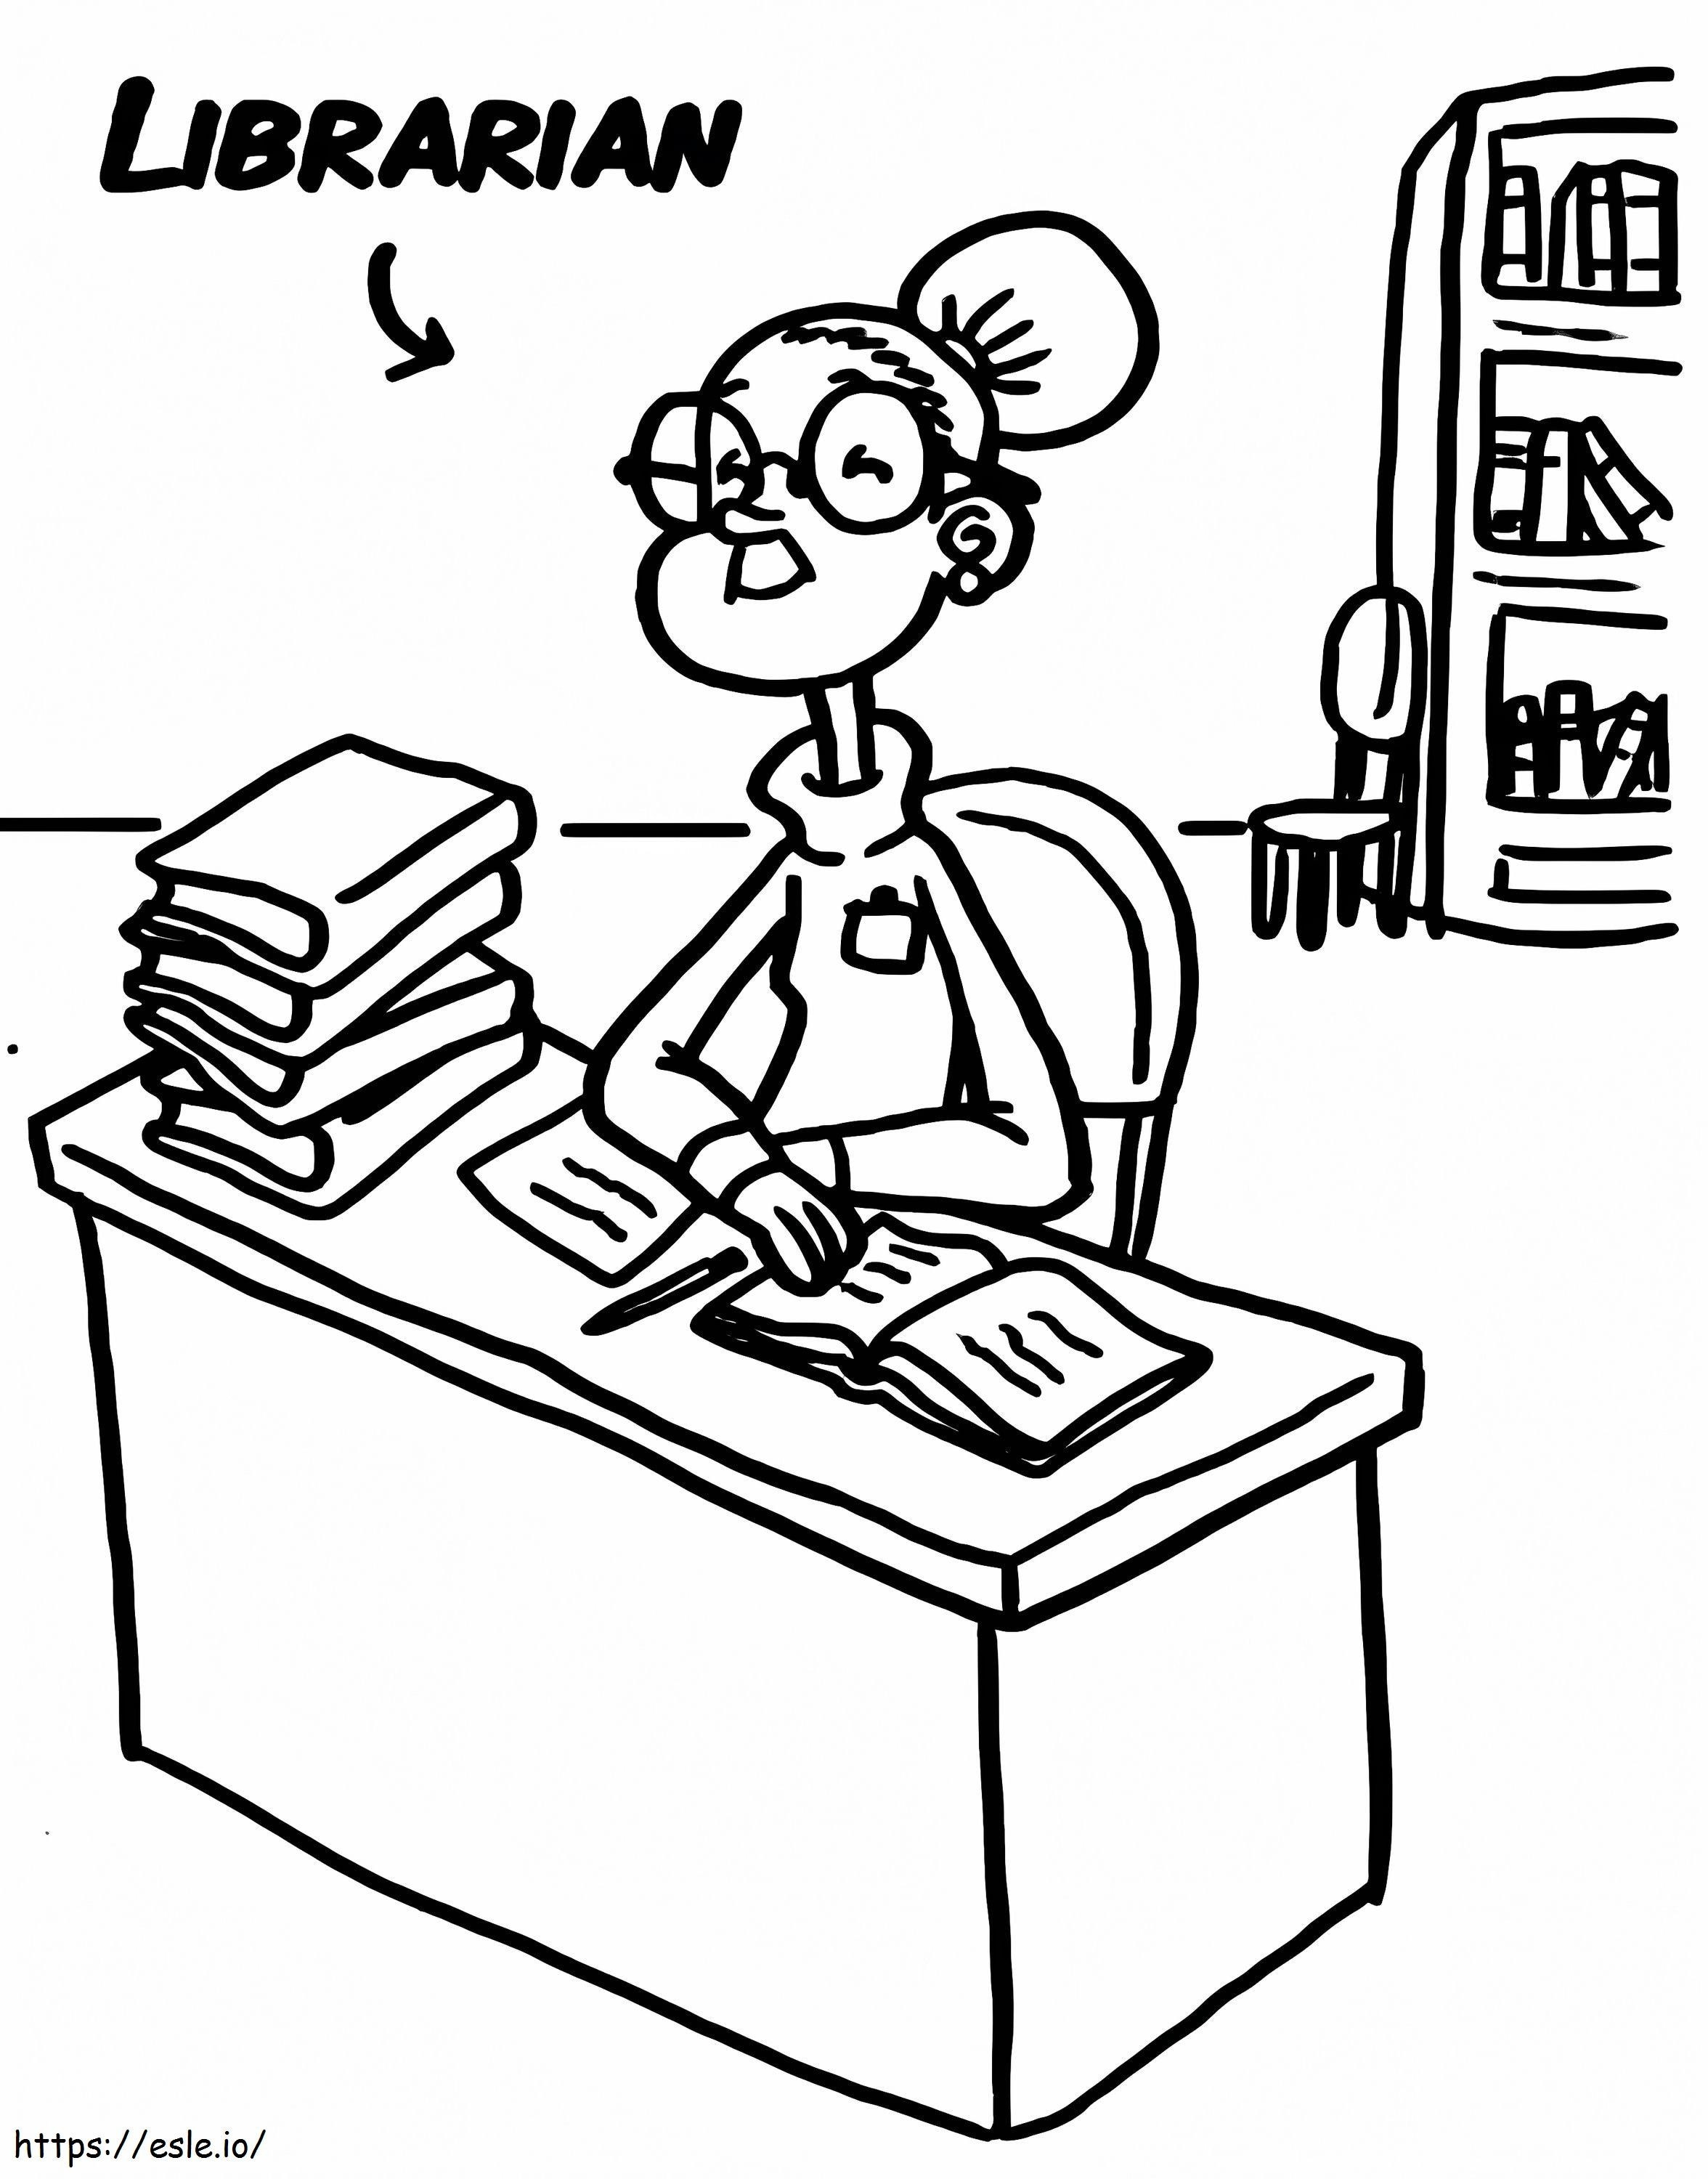 Librarian 3 coloring page